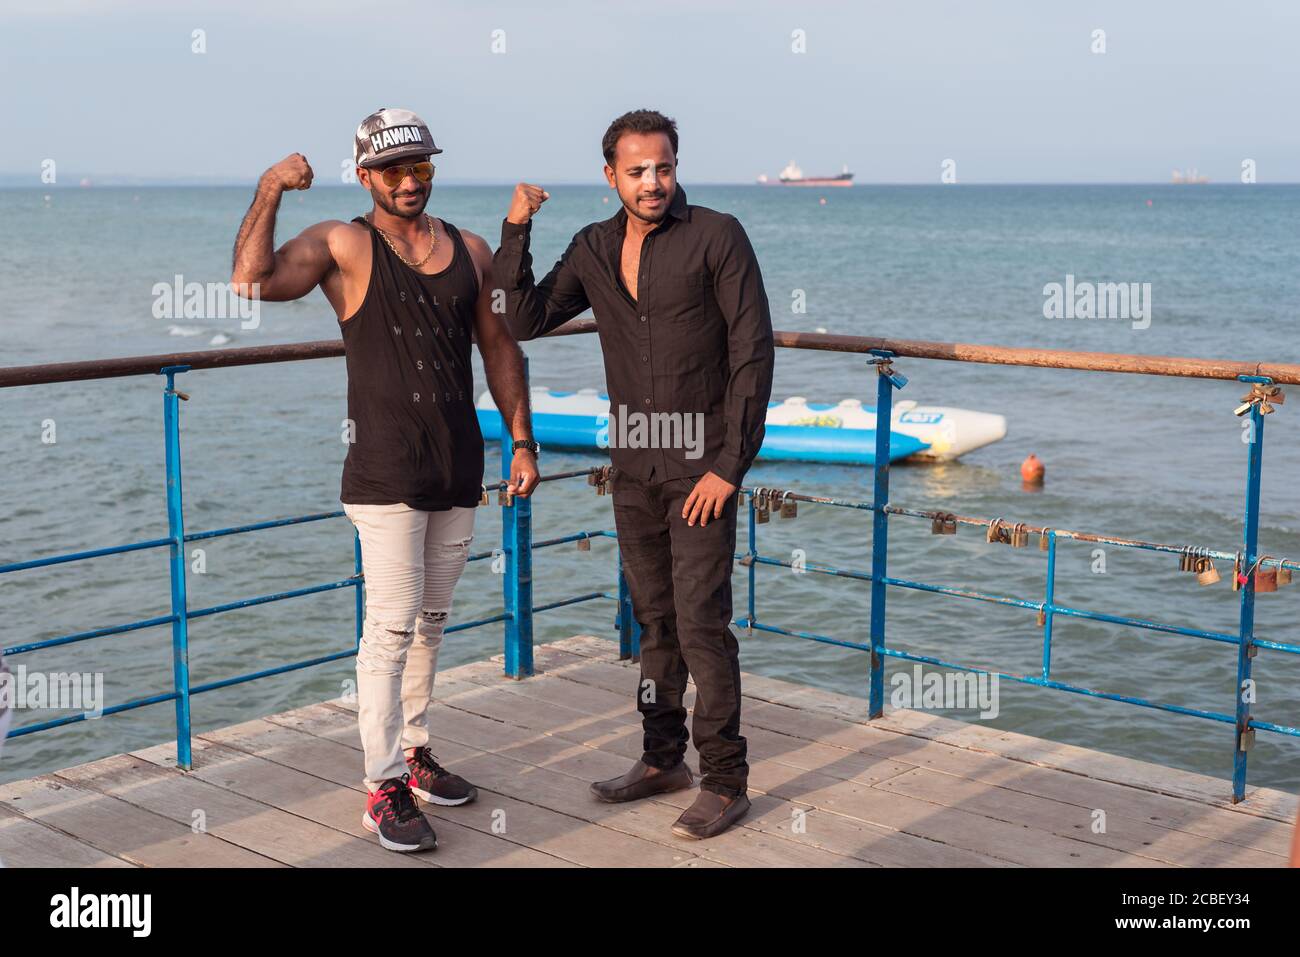 Larnaca / Cyprus - August 15, 2019: tourists taking pictures on the pier on Larnaca beach Stock Photo